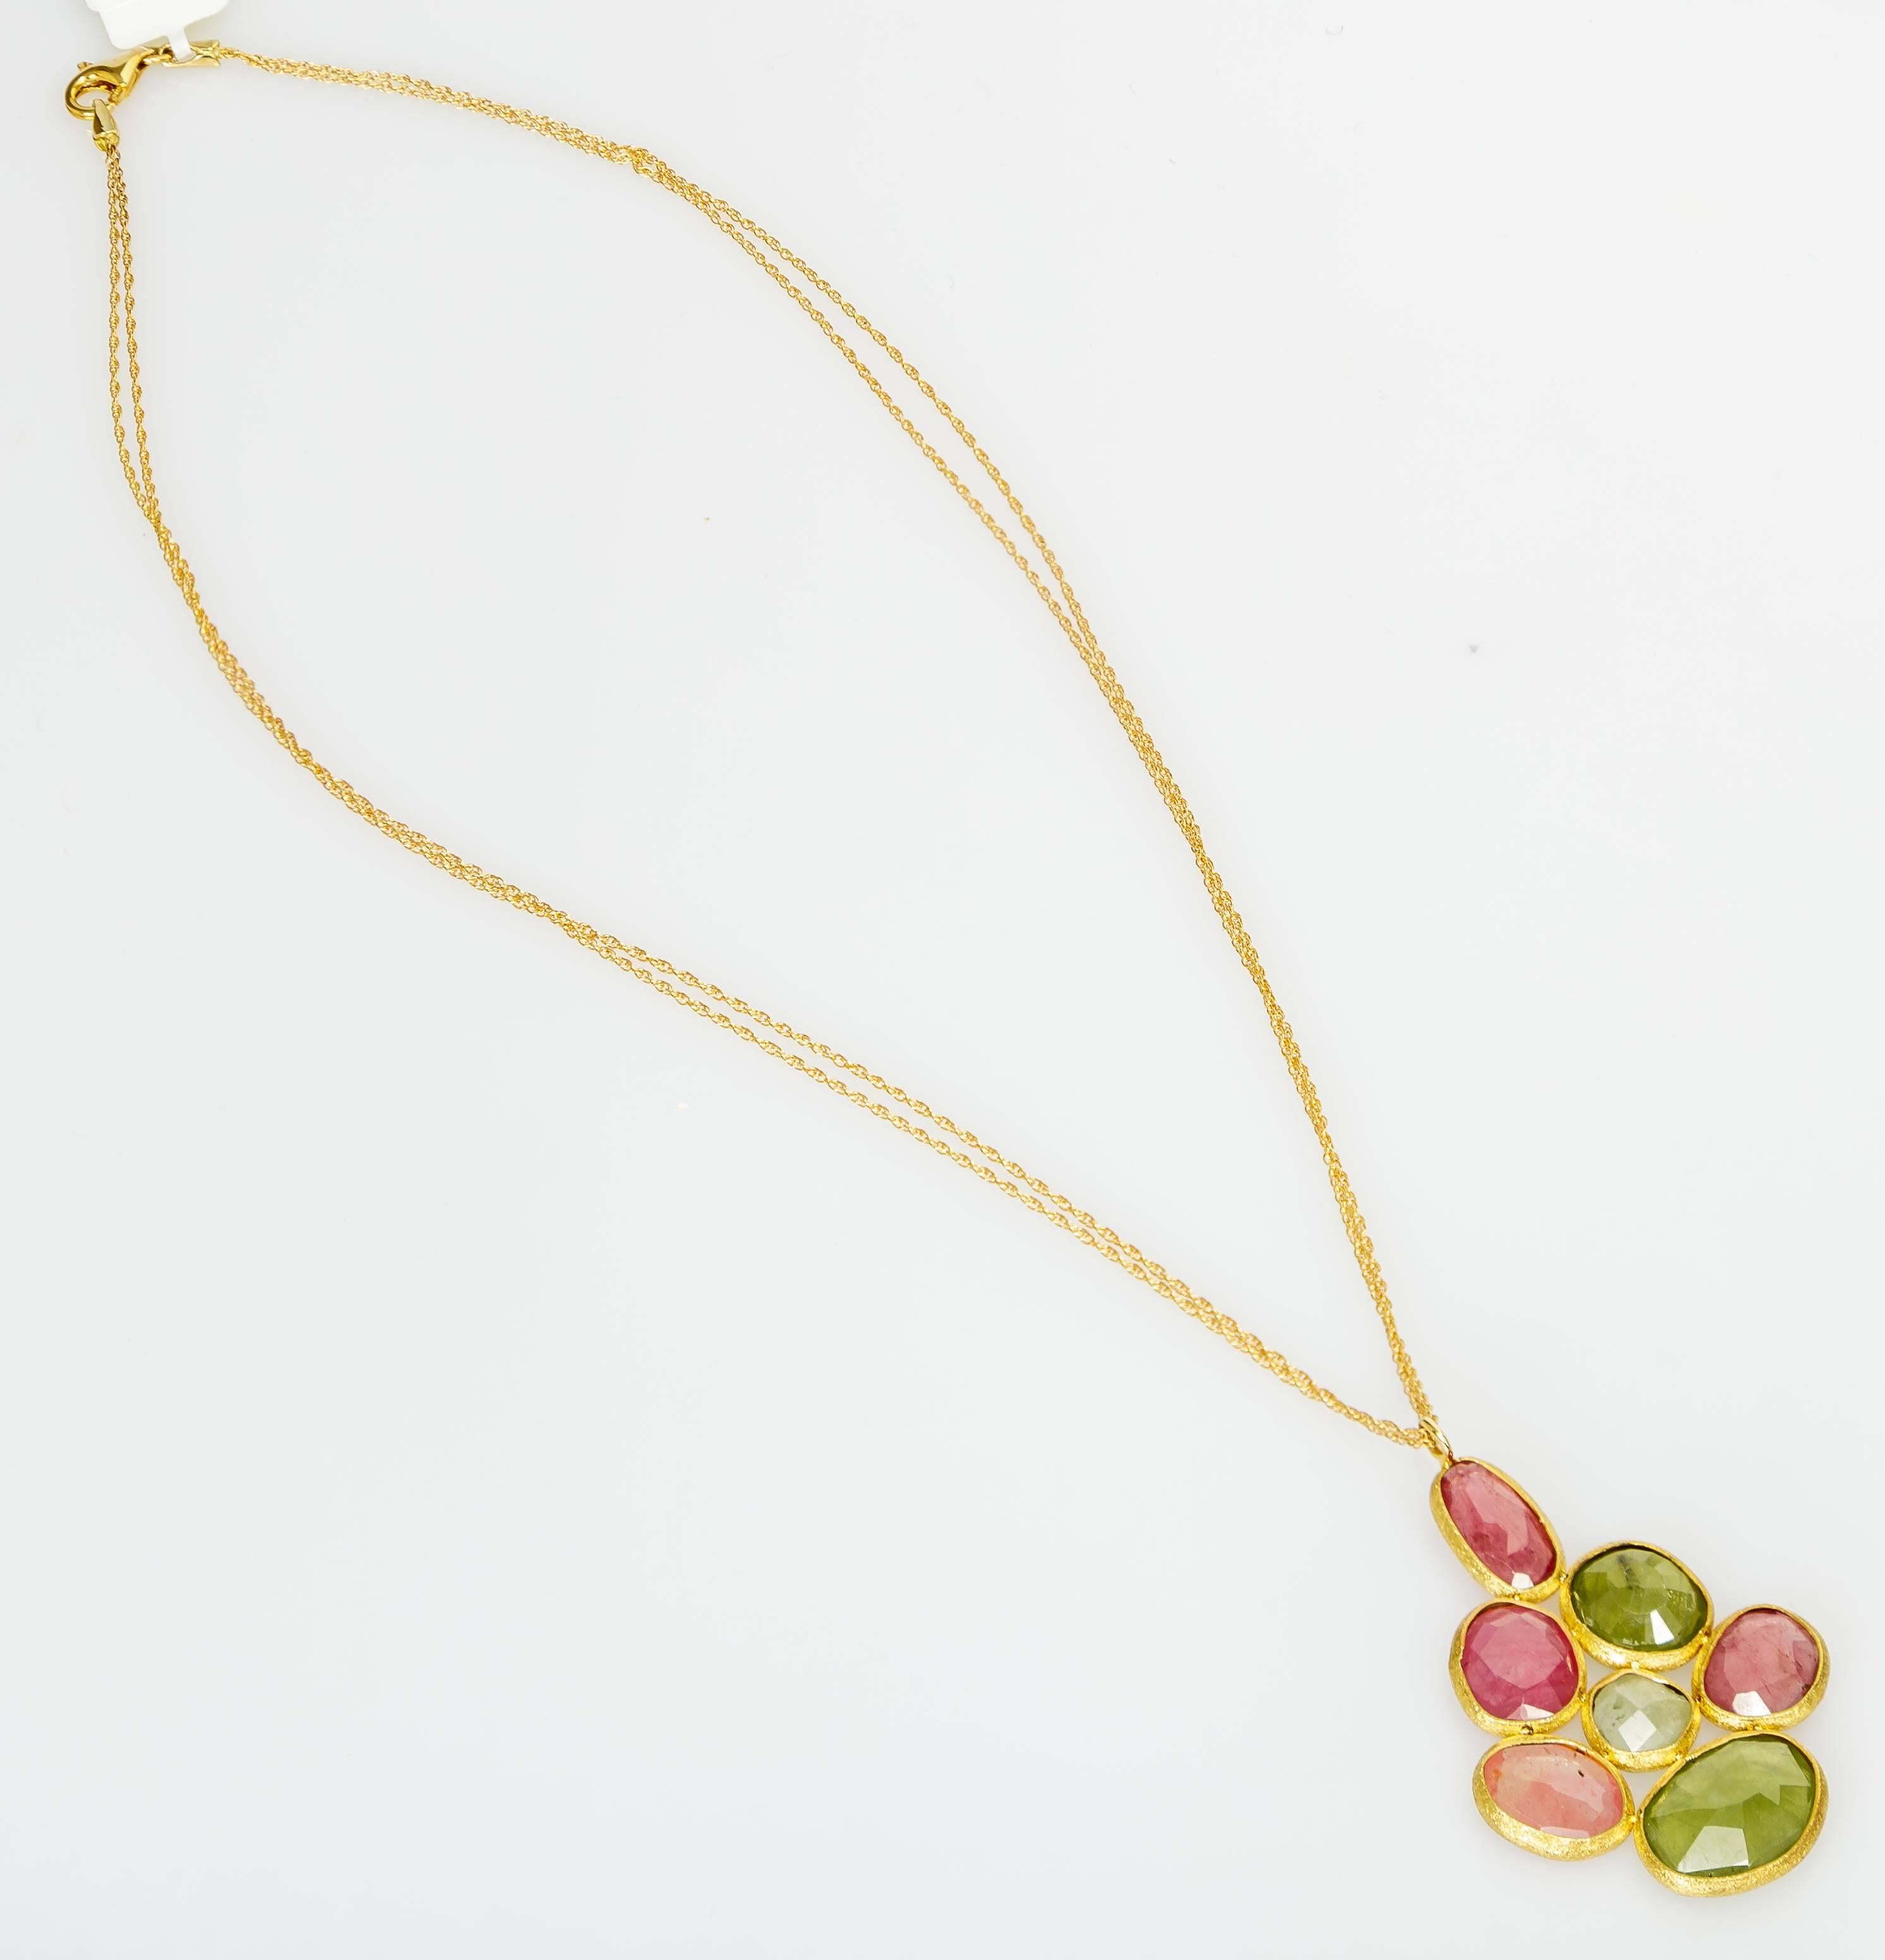 This 16 inch Yvel 18k yellow gold multi-strand necklace features natural colored faceted sapphires in an 18k yellow gold pendant. The sapphires total 10.00 ct.